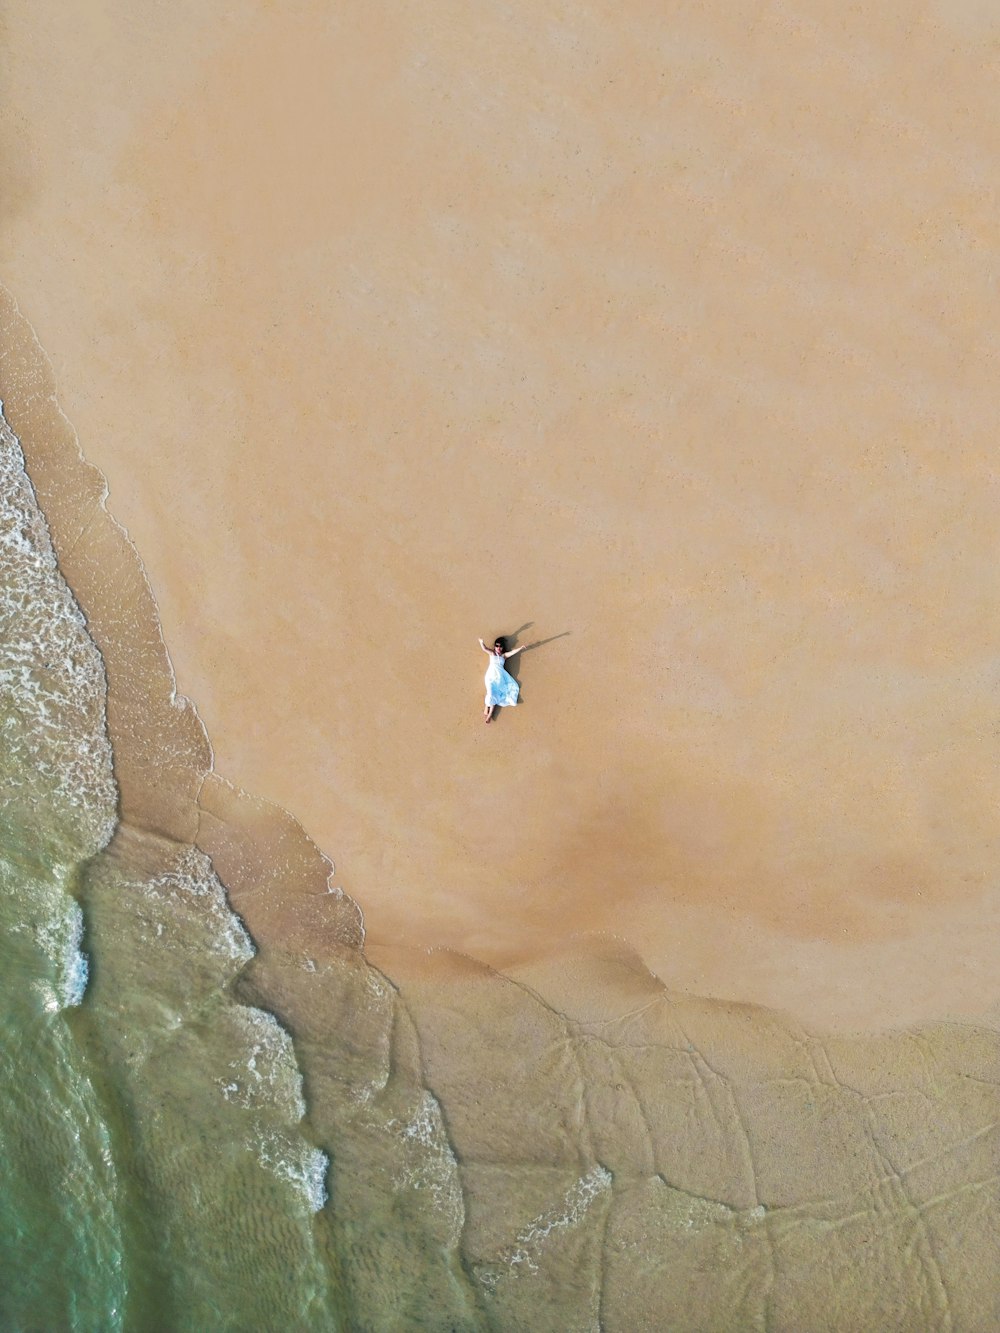 an aerial view of a person parasailing in the ocean